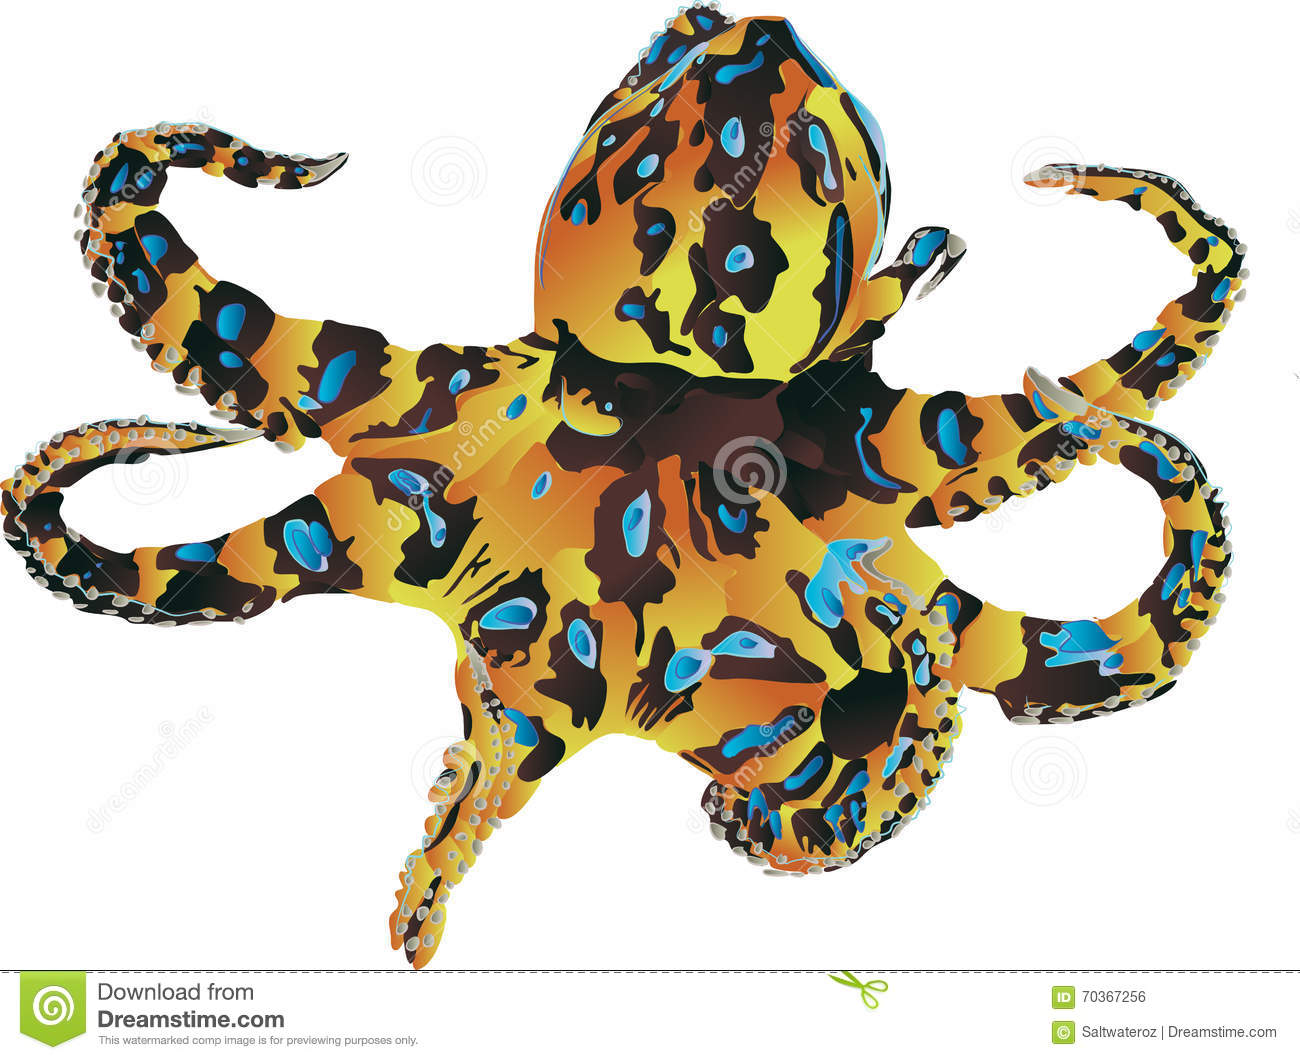 Images of Blue Ringed Octopus | 1300x1060